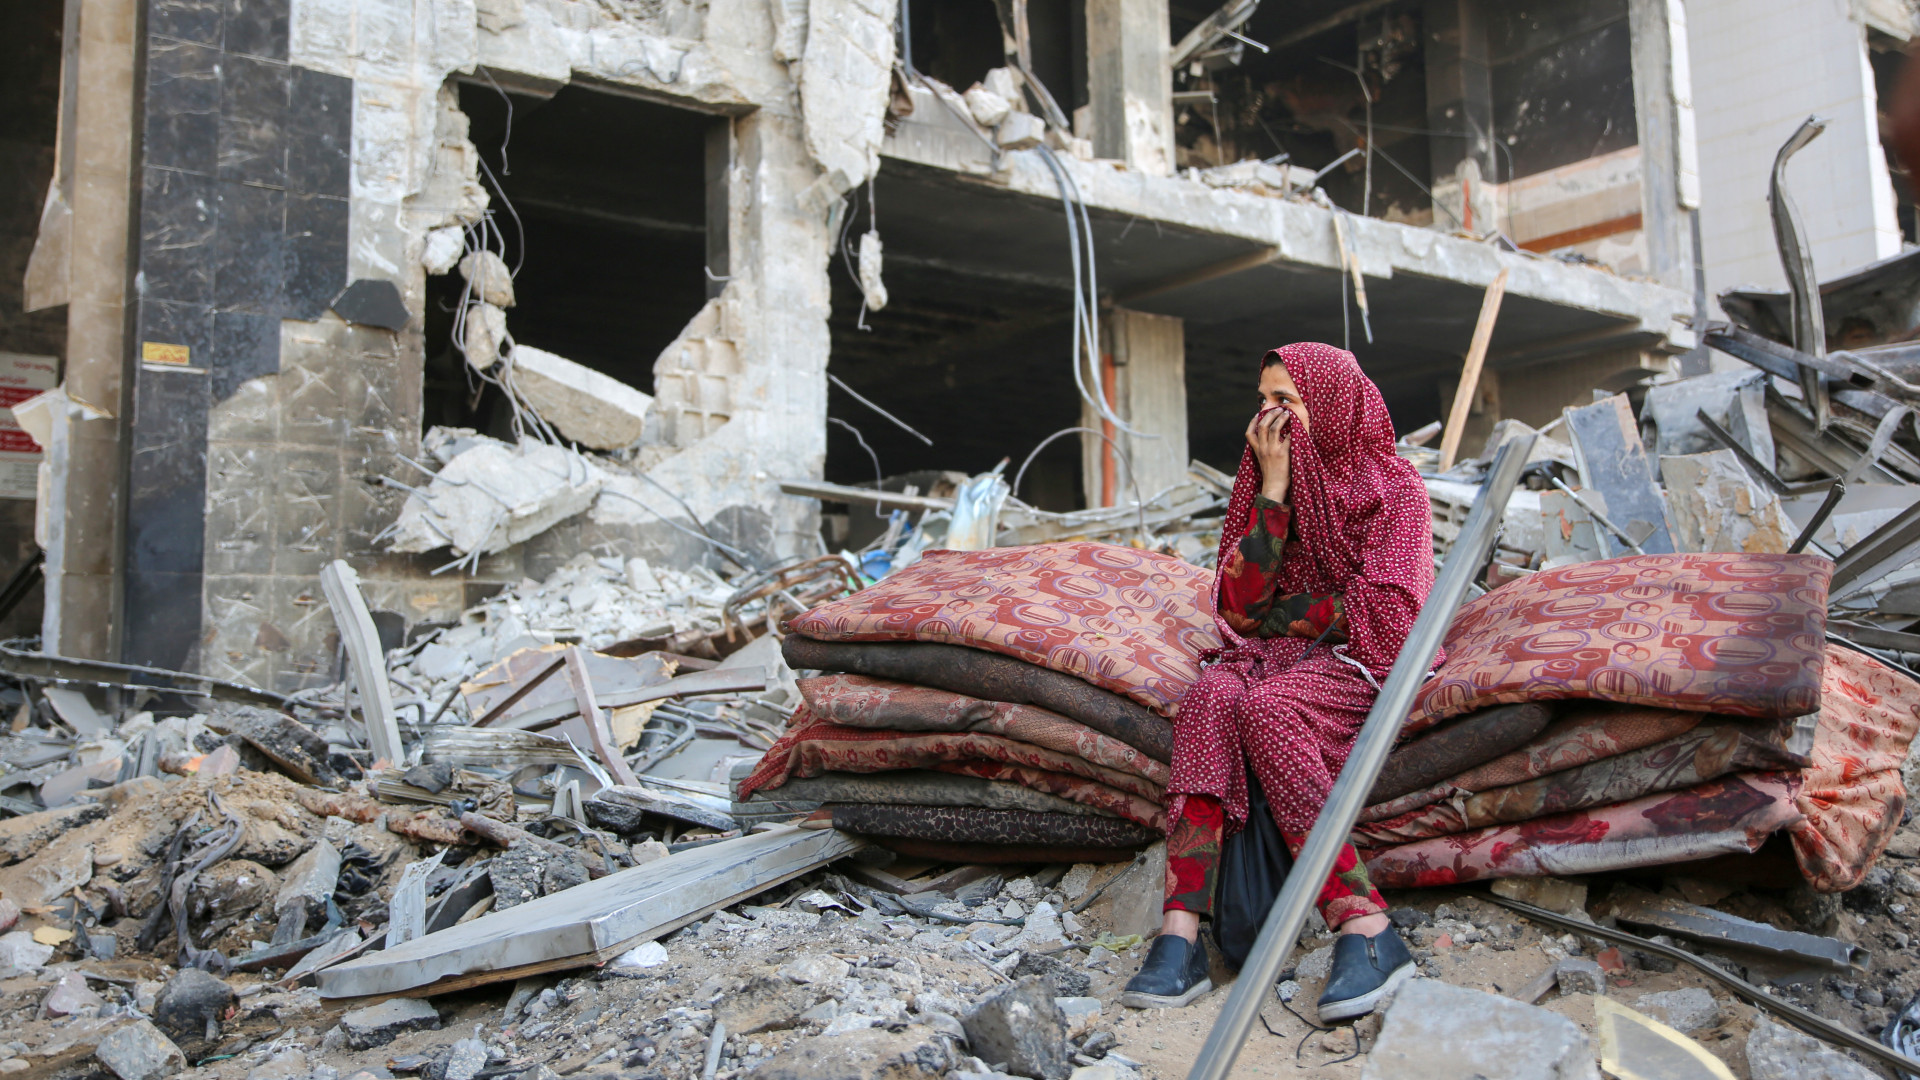 A Palestinian woman reacts as she sits amid the rubble of Gaza's al-Shifa hospital after an Israeli military attack on the complex on 1 April (AFP)